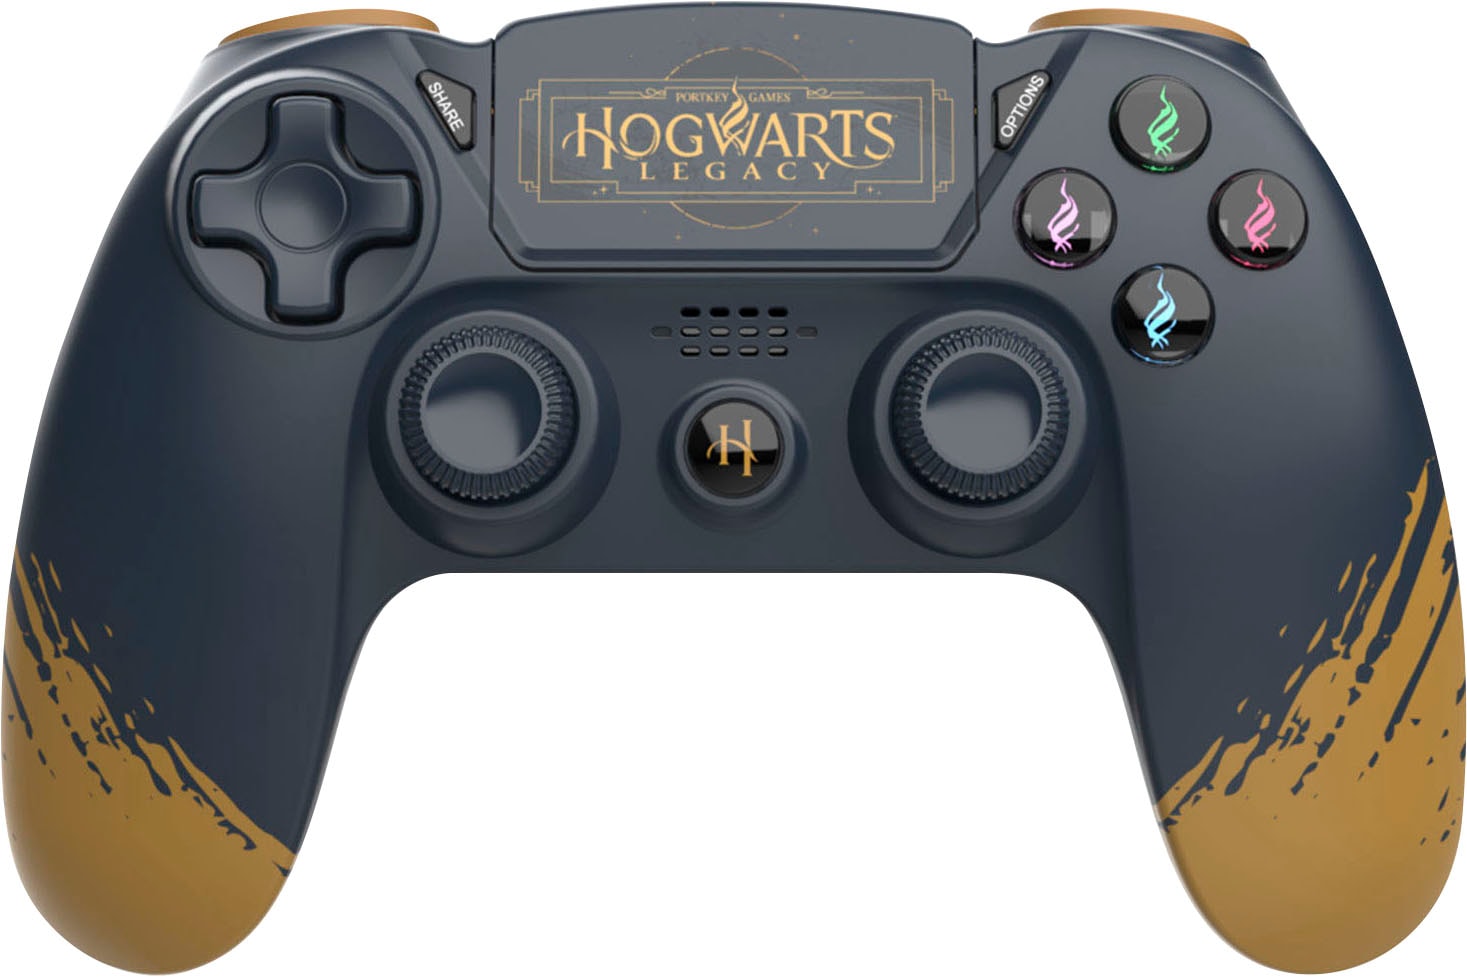 Freaks and Geeks PlayStation 4-Controller »Harry Potter Hogwarts Legacy Wireless Controller«